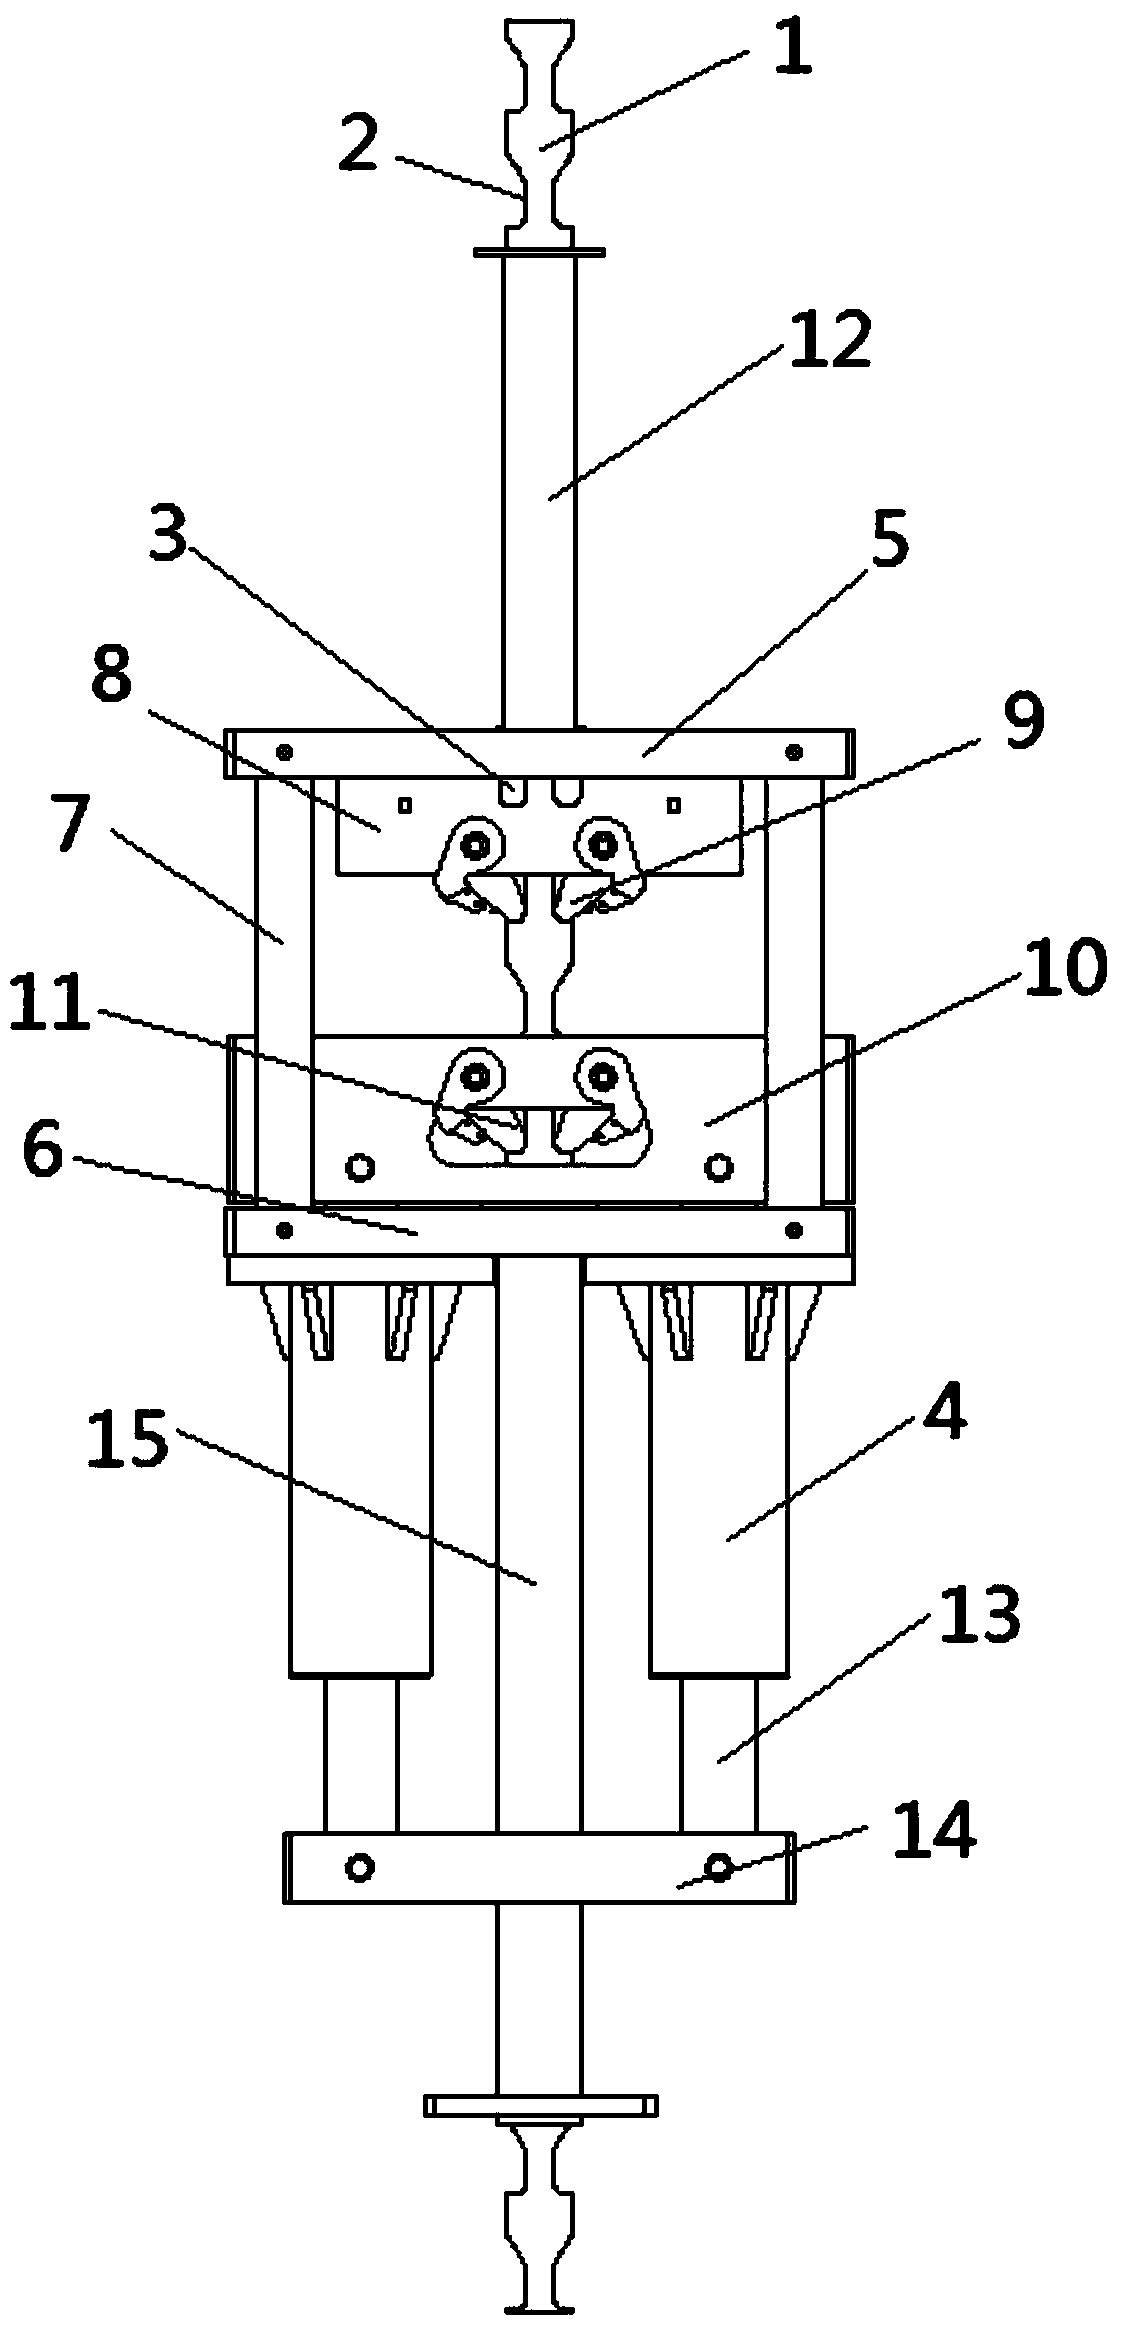 A hydraulic climbing mechanism with safety locking function